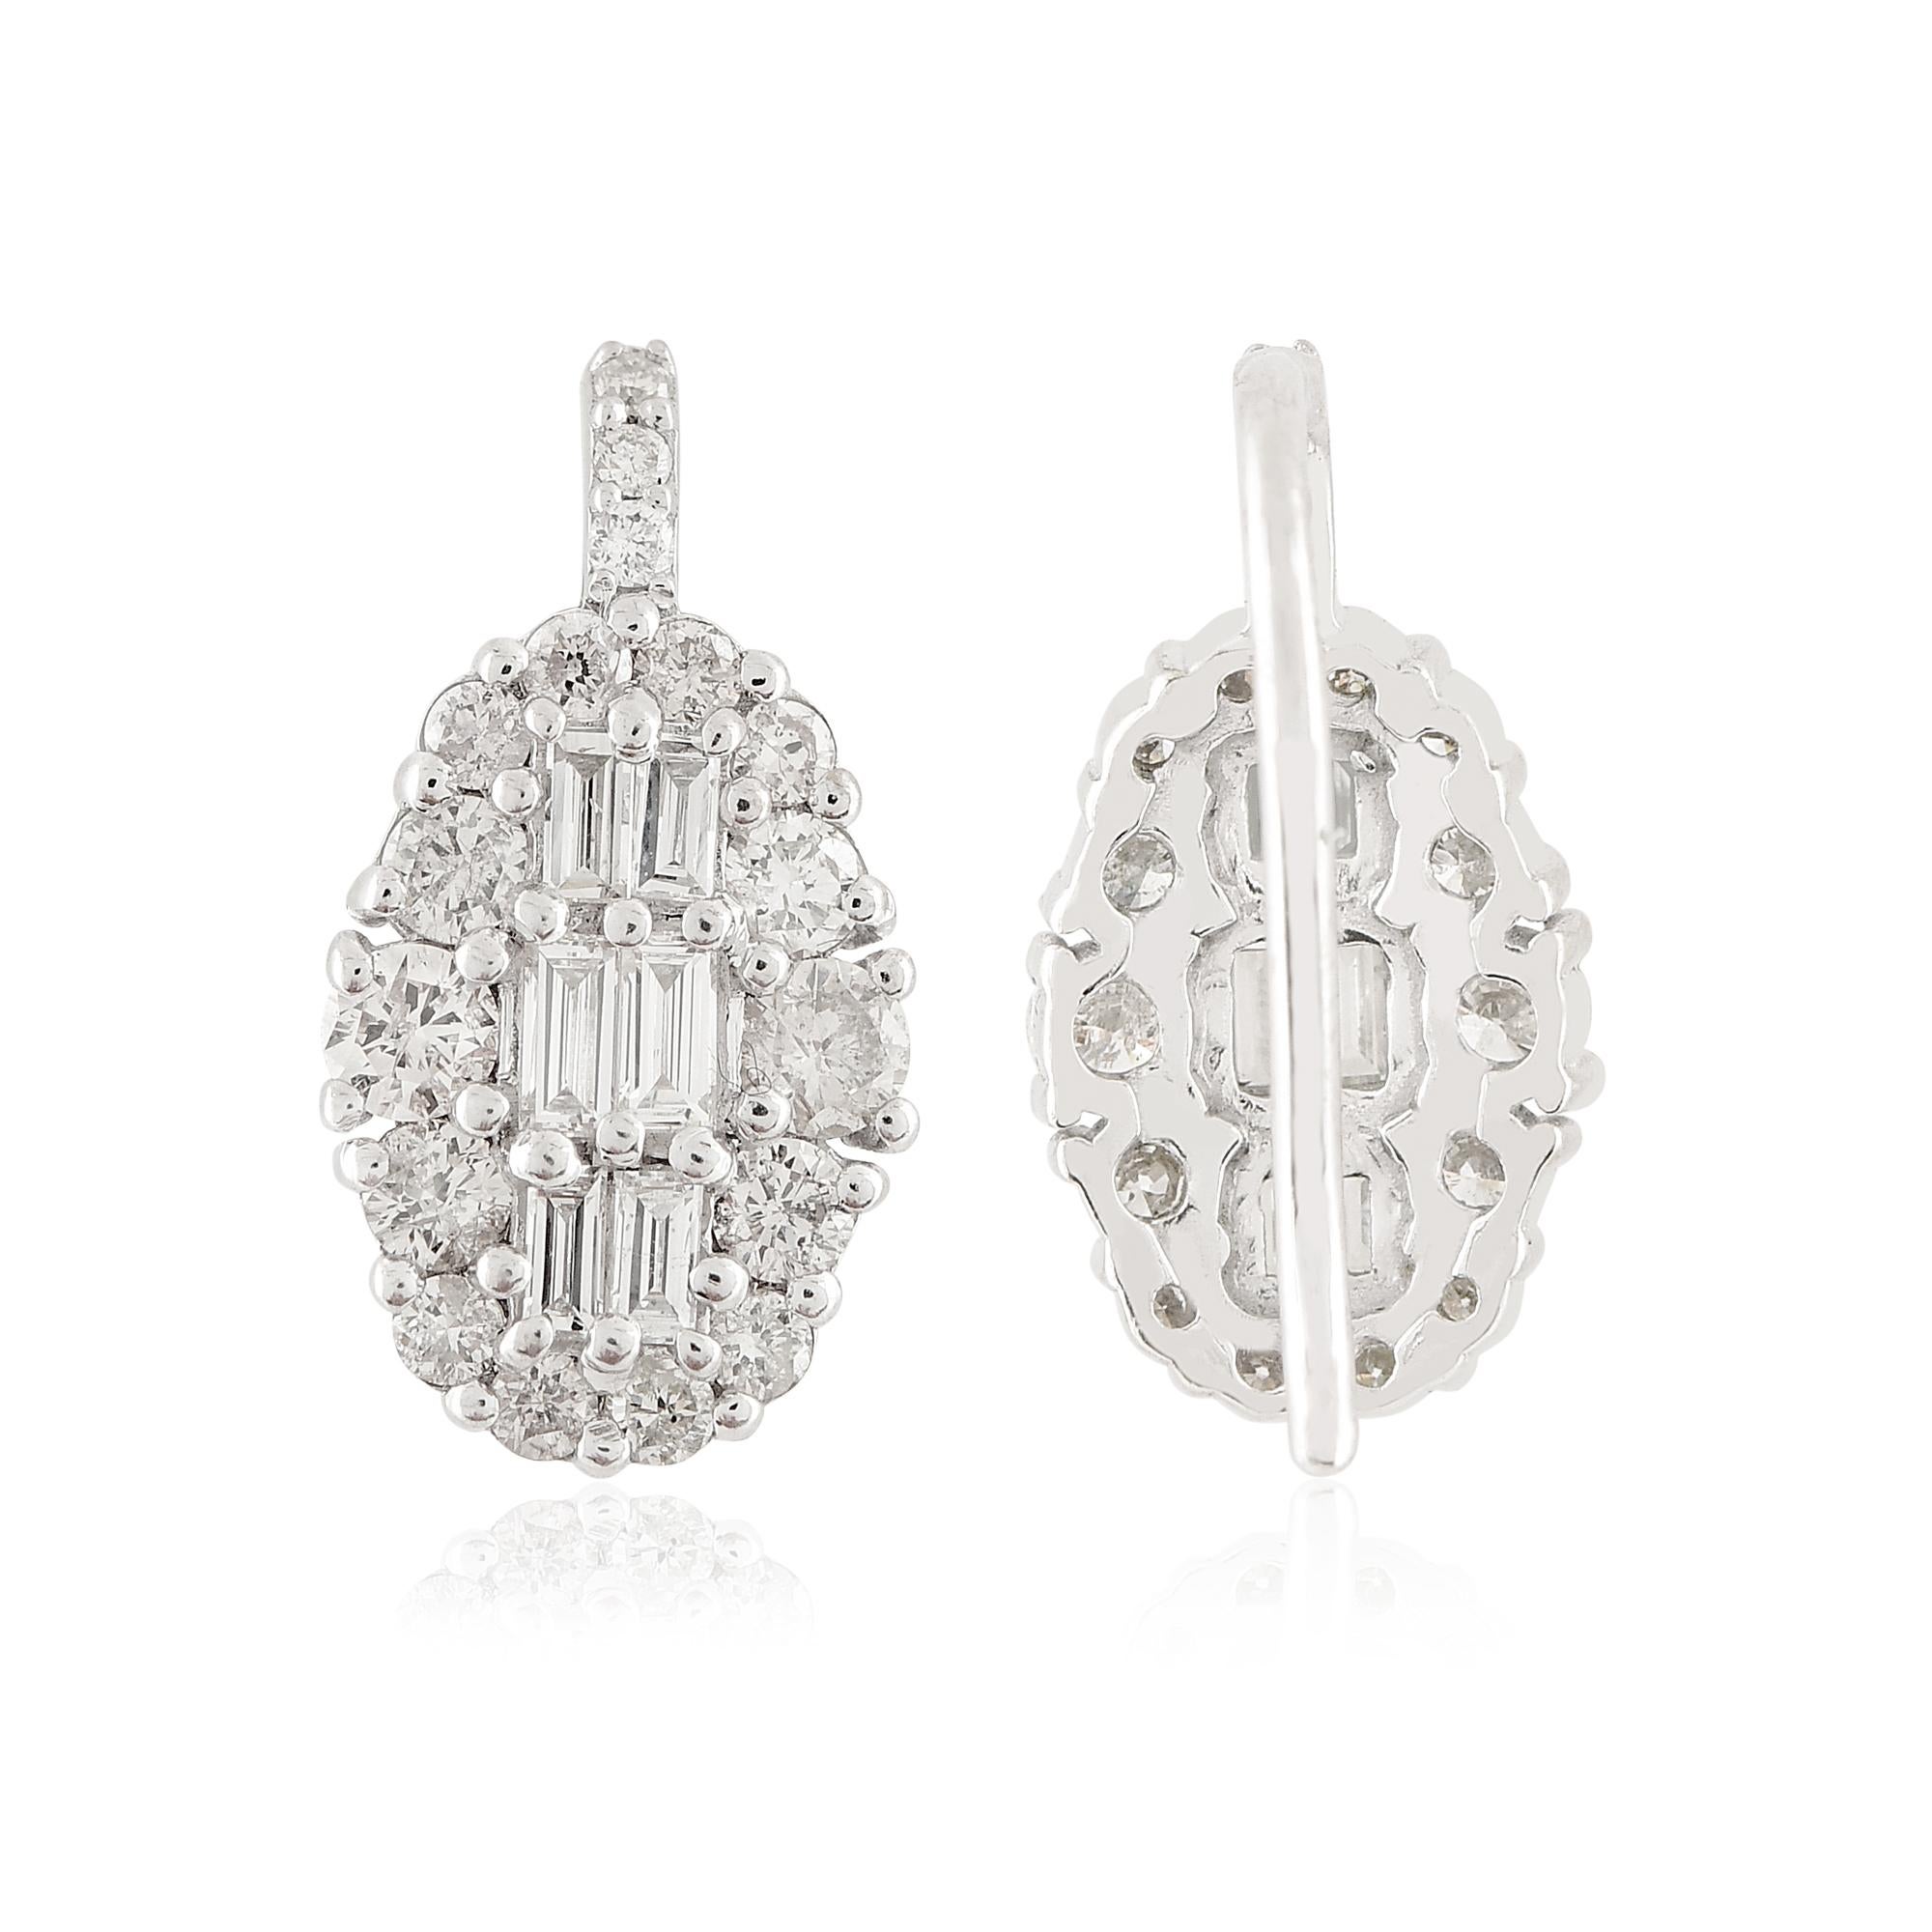 Introducing these exquisite 1.01 carat baguette diamond designer hook earrings, crafted in solid 10k white gold. These stunning earrings are a true testament to elegance and sophistication, making them a perfect accessory for any occasion.

Item